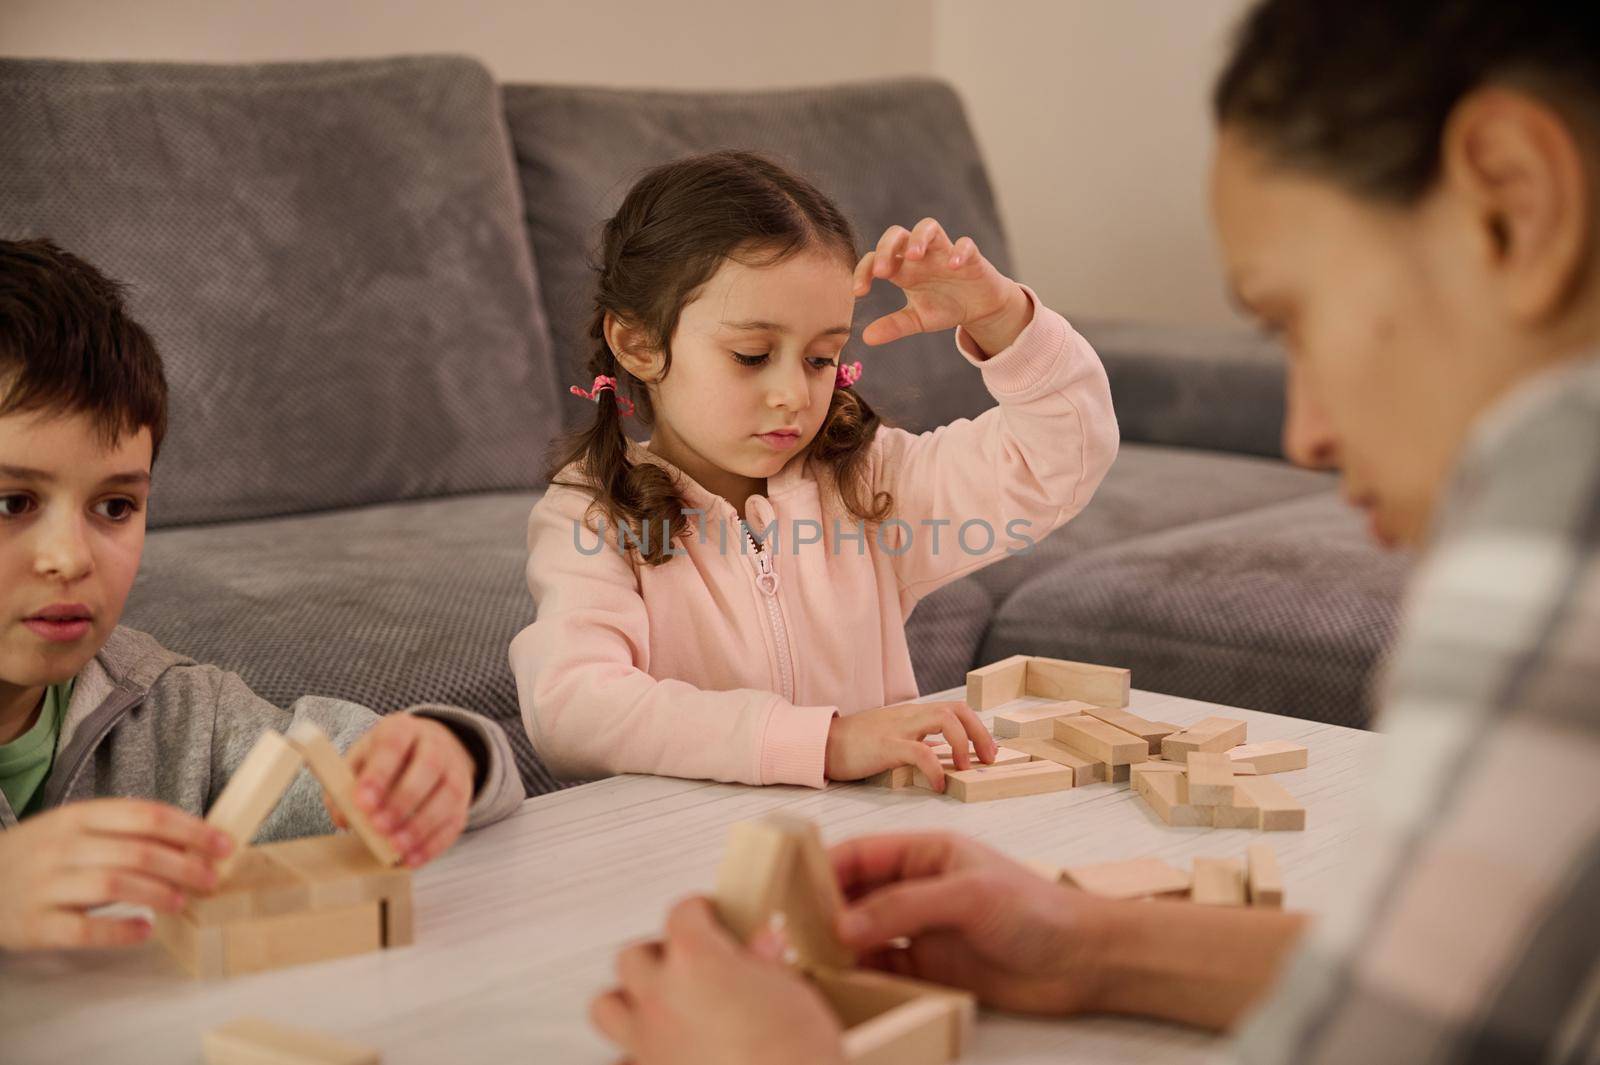 Fine motor skills, concentration development, educational leisure, family pastime concept. Cute kids playing board game with their blurred mom focused on building a wooden structure in the foreground by artgf